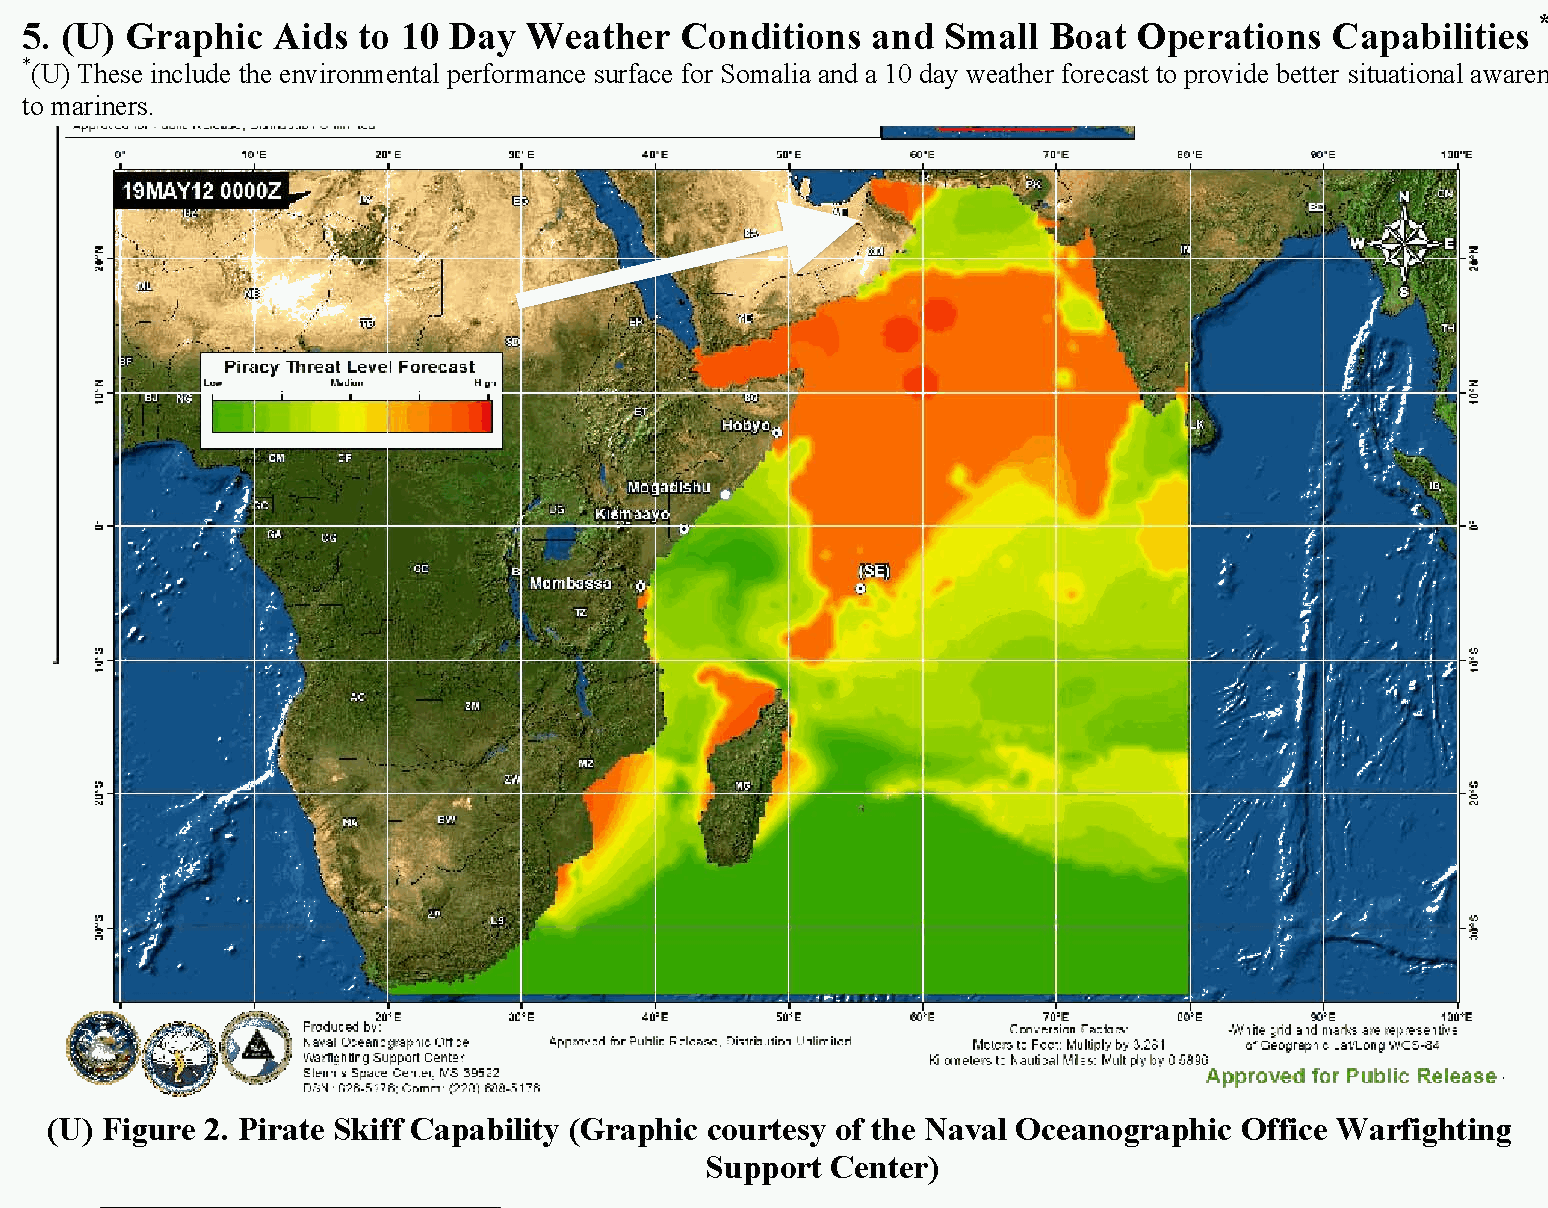 Spread of piracy by end of 2011 - orange represents waters with Somali pirates, red represents highest risk zone.Courtesy of Naval Oceanographic Office War Fighting Support Center.